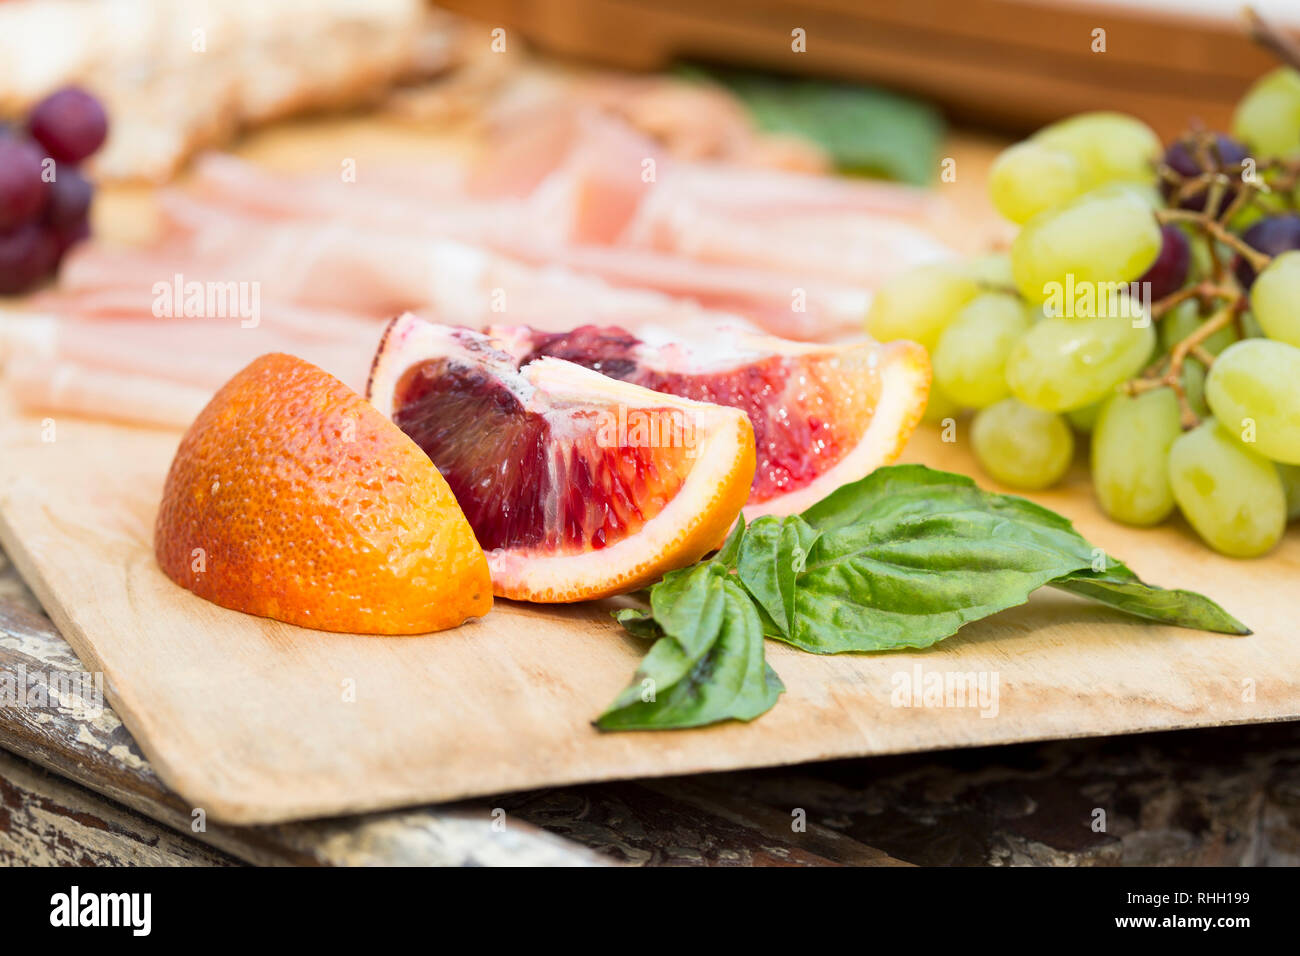 Blood orange slices on wooden charcuterie board for outdoor entertaining picnic. Stock Photo